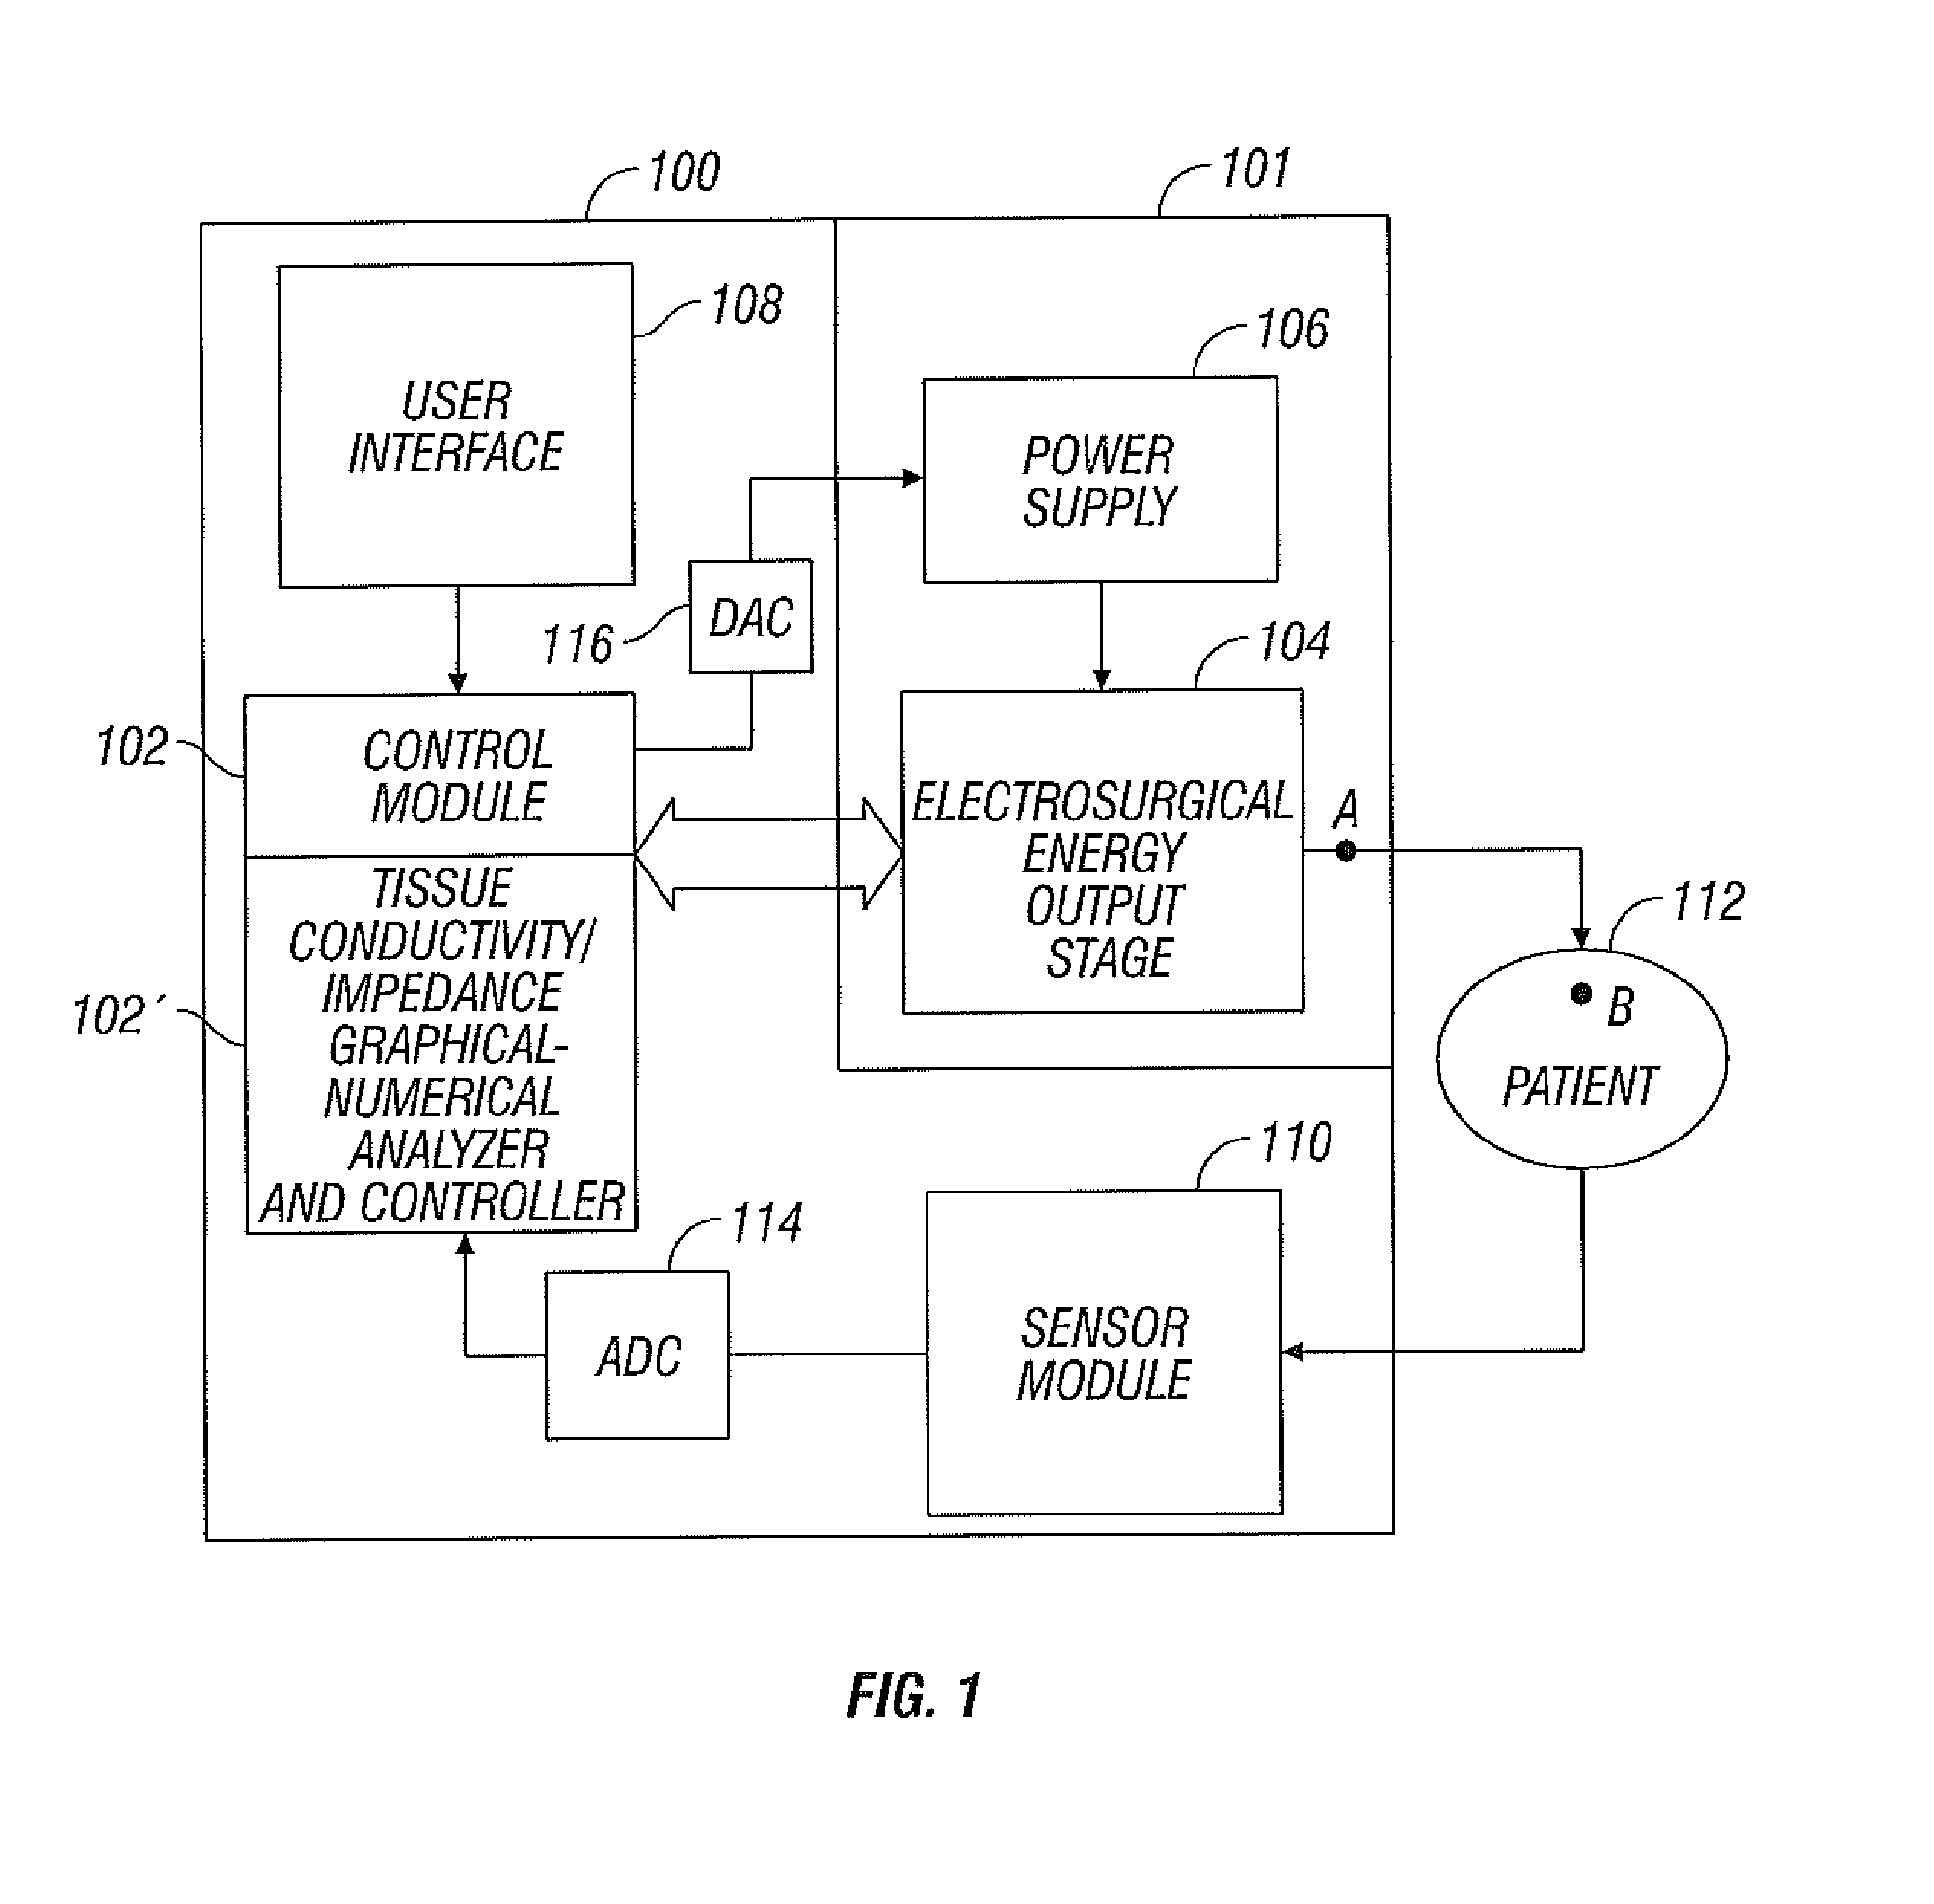 Hydraulic Conductivity Monitoring to Initiate Tissue Division